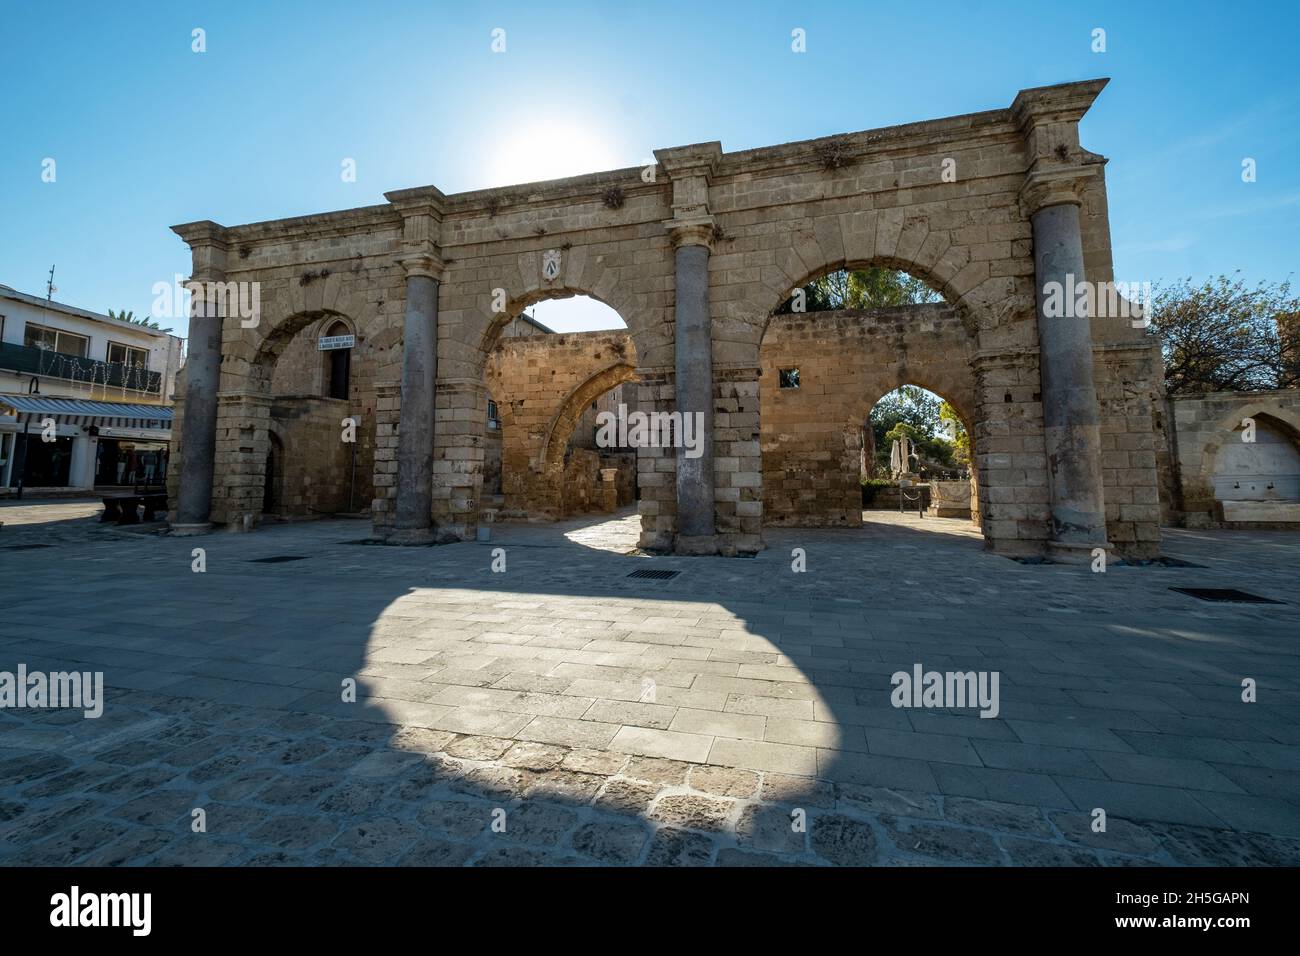 The Tripple-Arched Entrance to Venetian Palace, Famagusta, Cyprus. Stock Photo